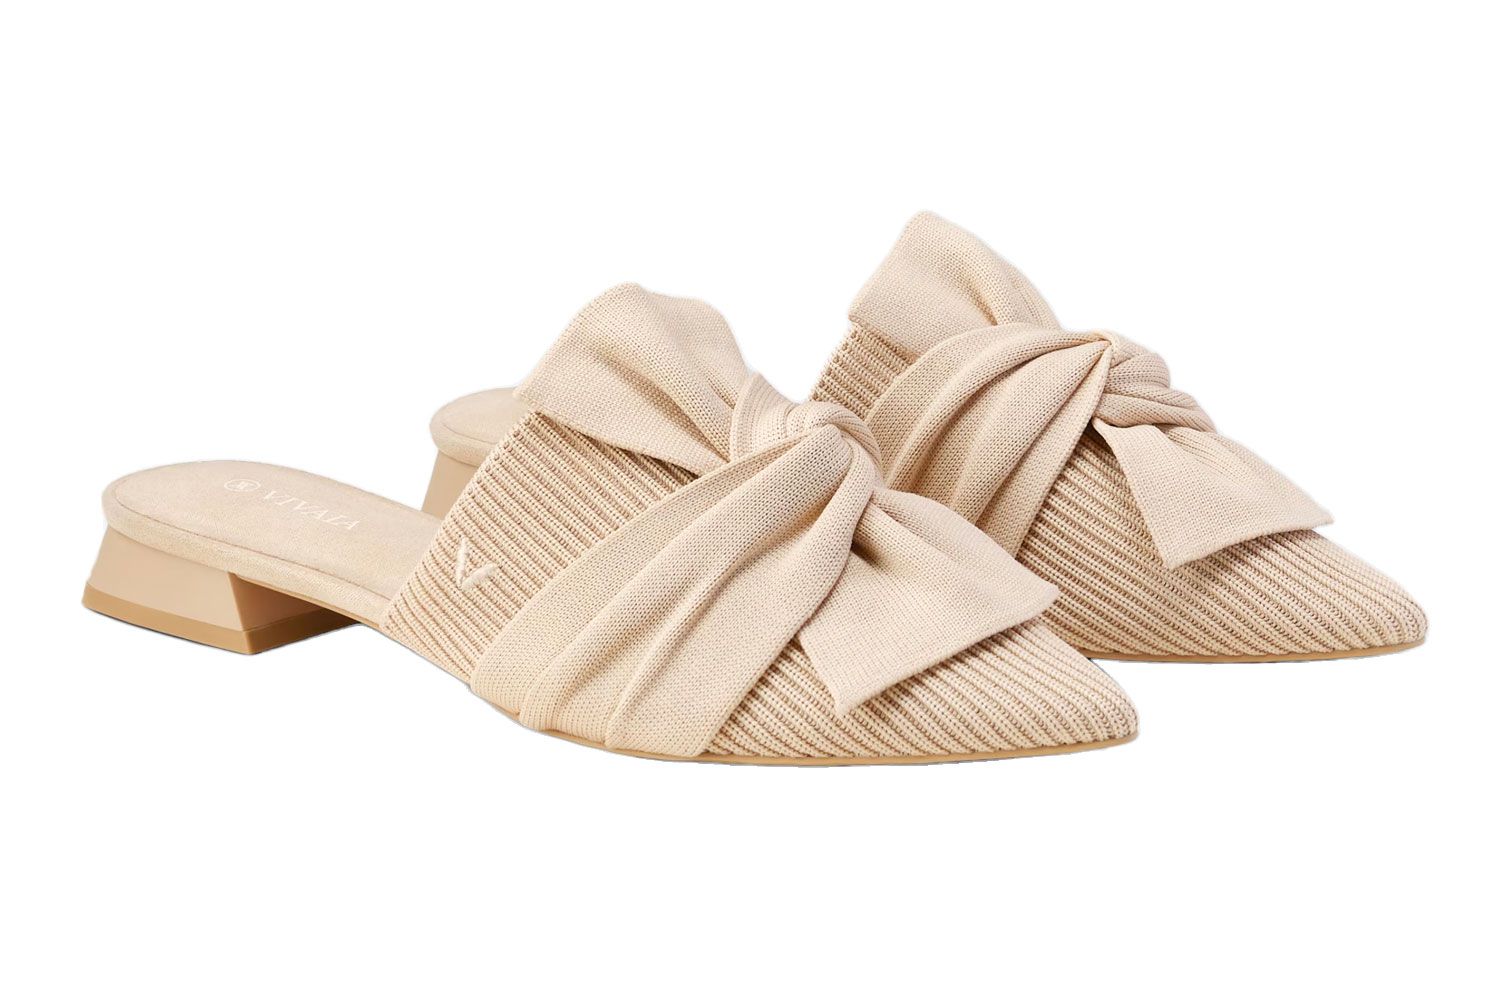 Vivaia Pointed-Toe Knot Sandals